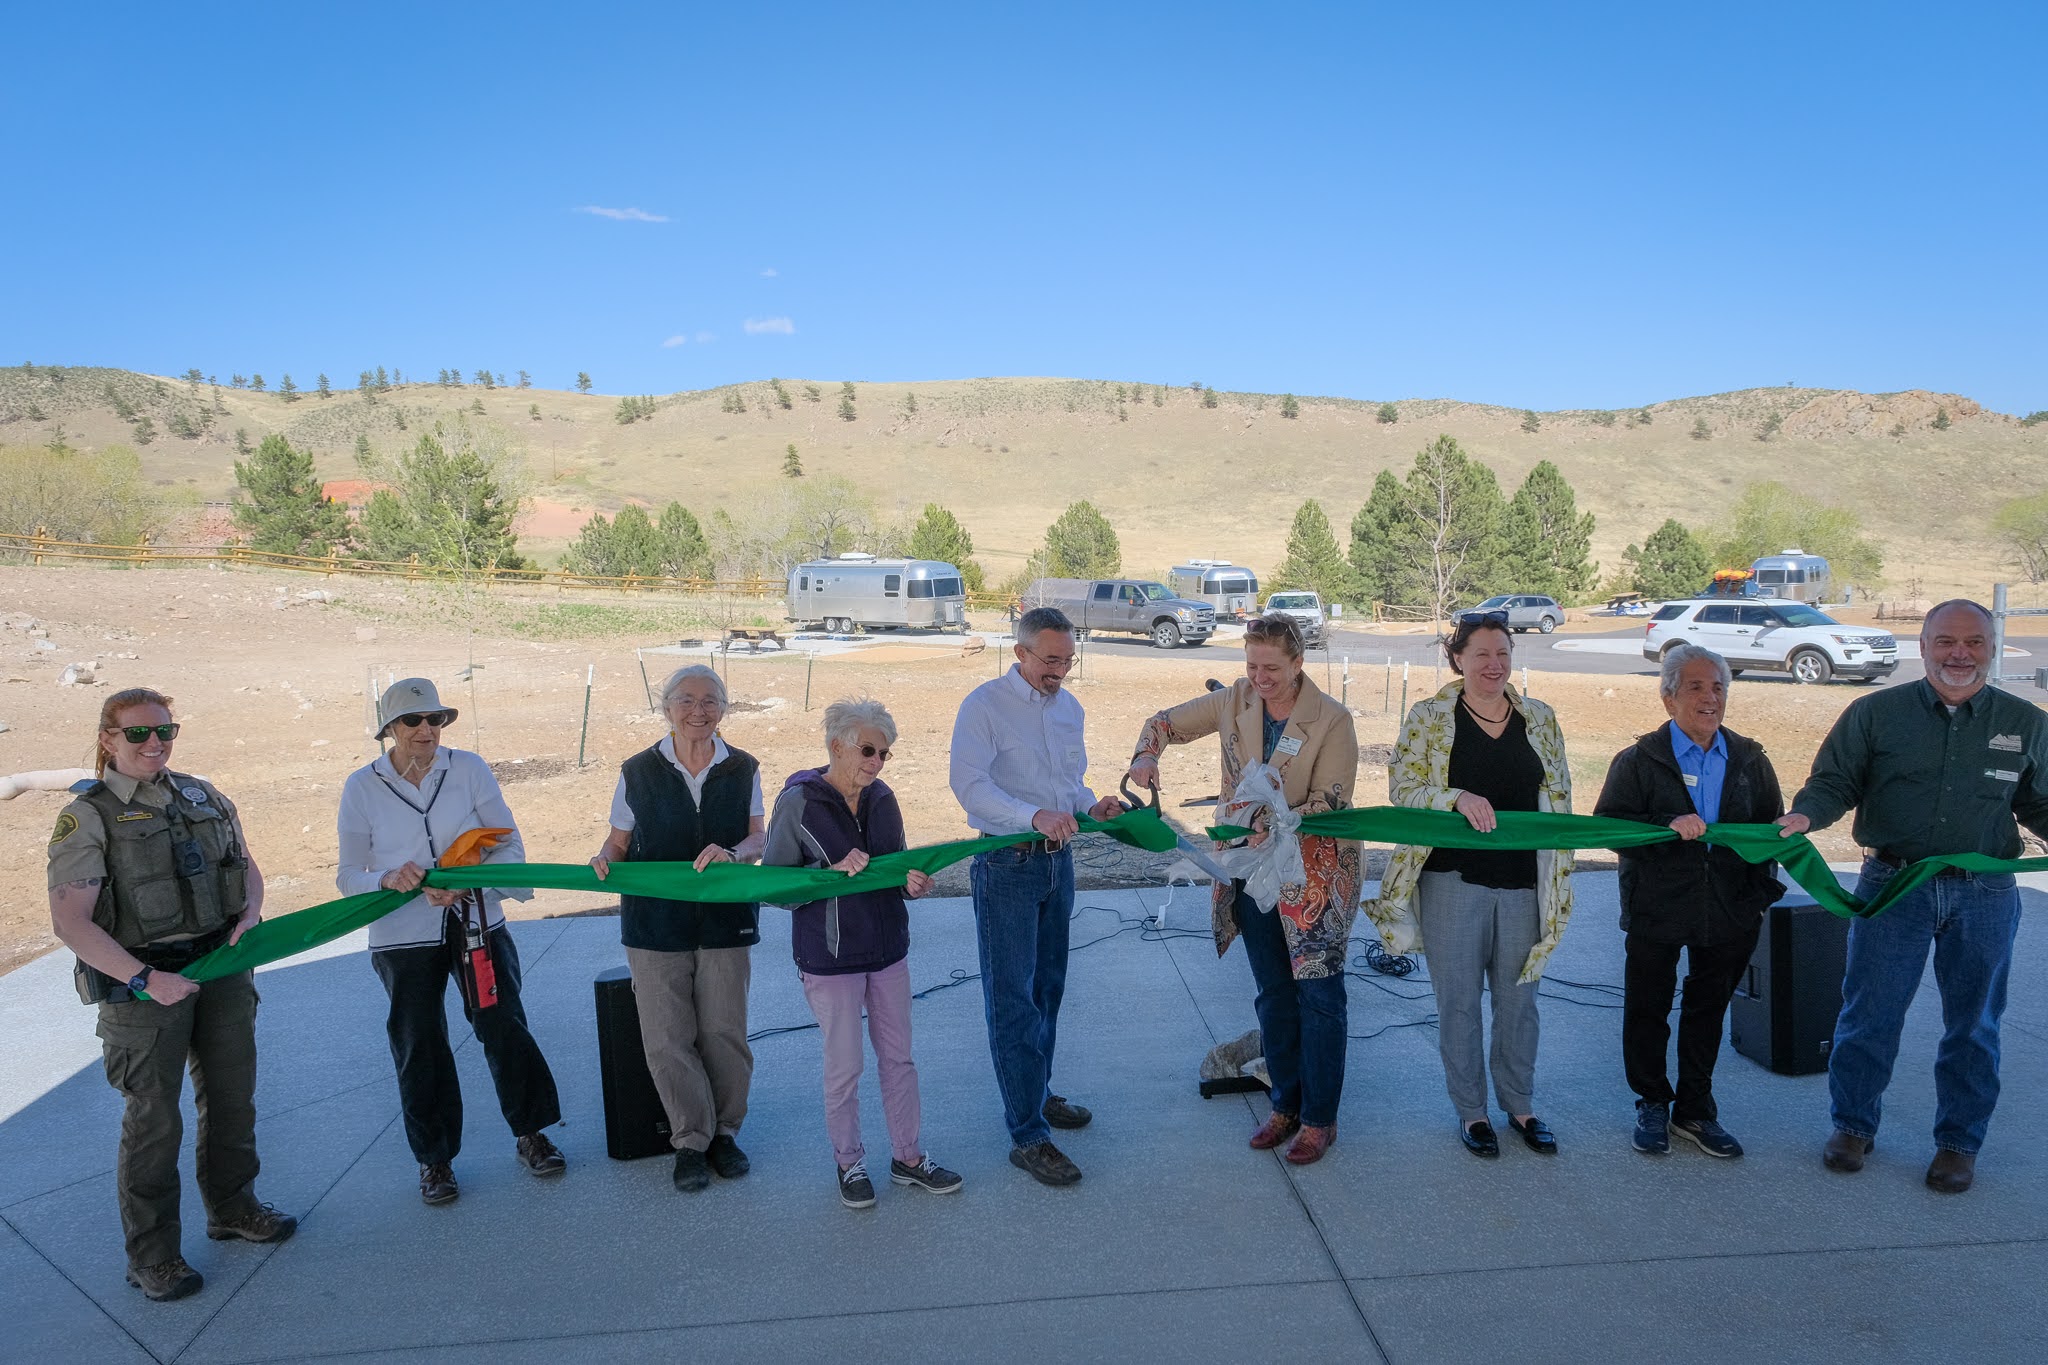 Image 4: Officials gather to cut the ribbon to open Sky View Campground on May 12, 2022.